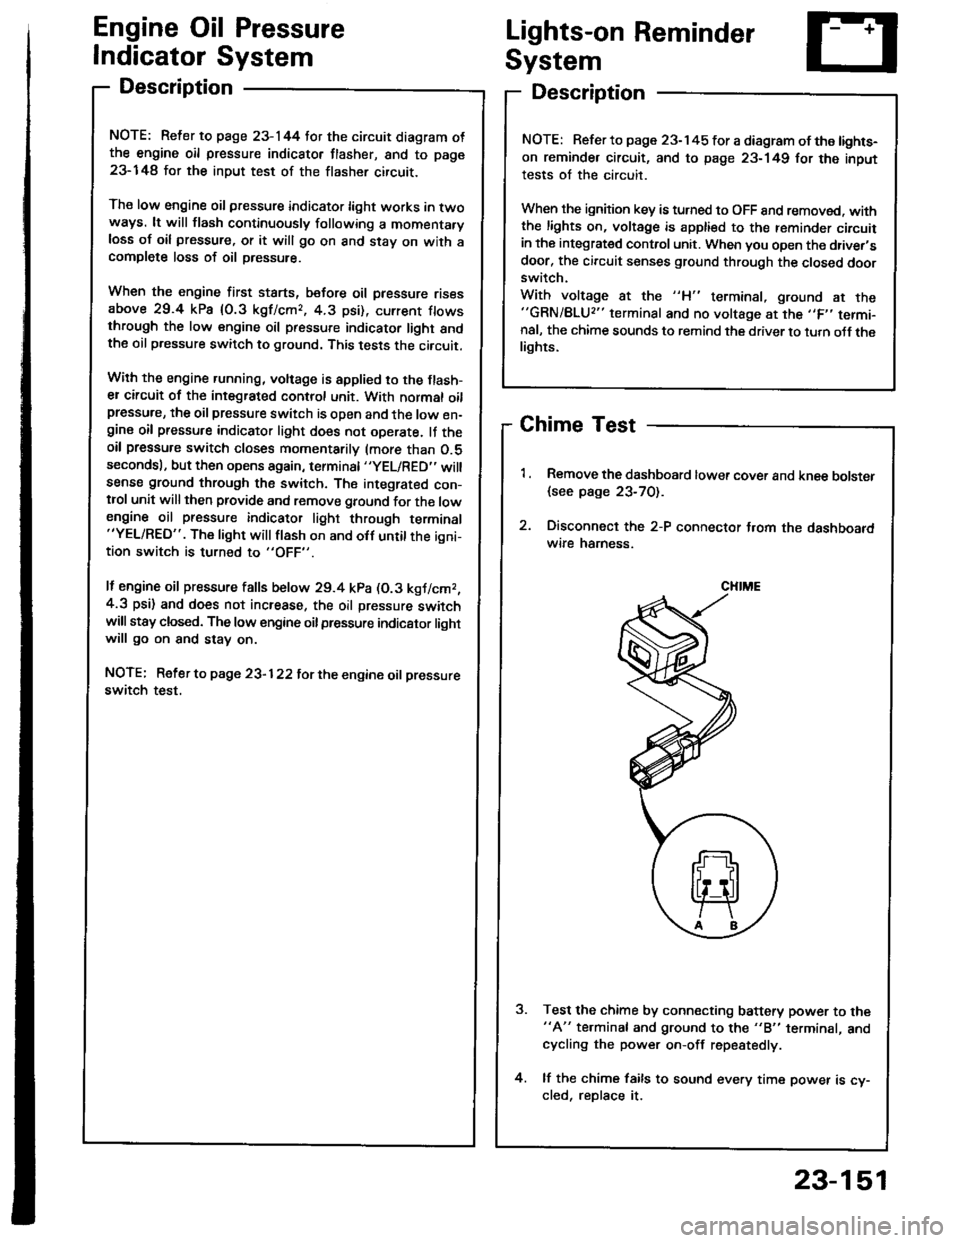 HONDA INTEGRA 1994 4.G User Guide Engine Oil Pressure
Indicator System
Description
NOTE: Reter to page 23-144 tor the circuit diagram otthe engine oil pressure indicator flasher, snd to page
23-148 lor the input test of the flasher ci